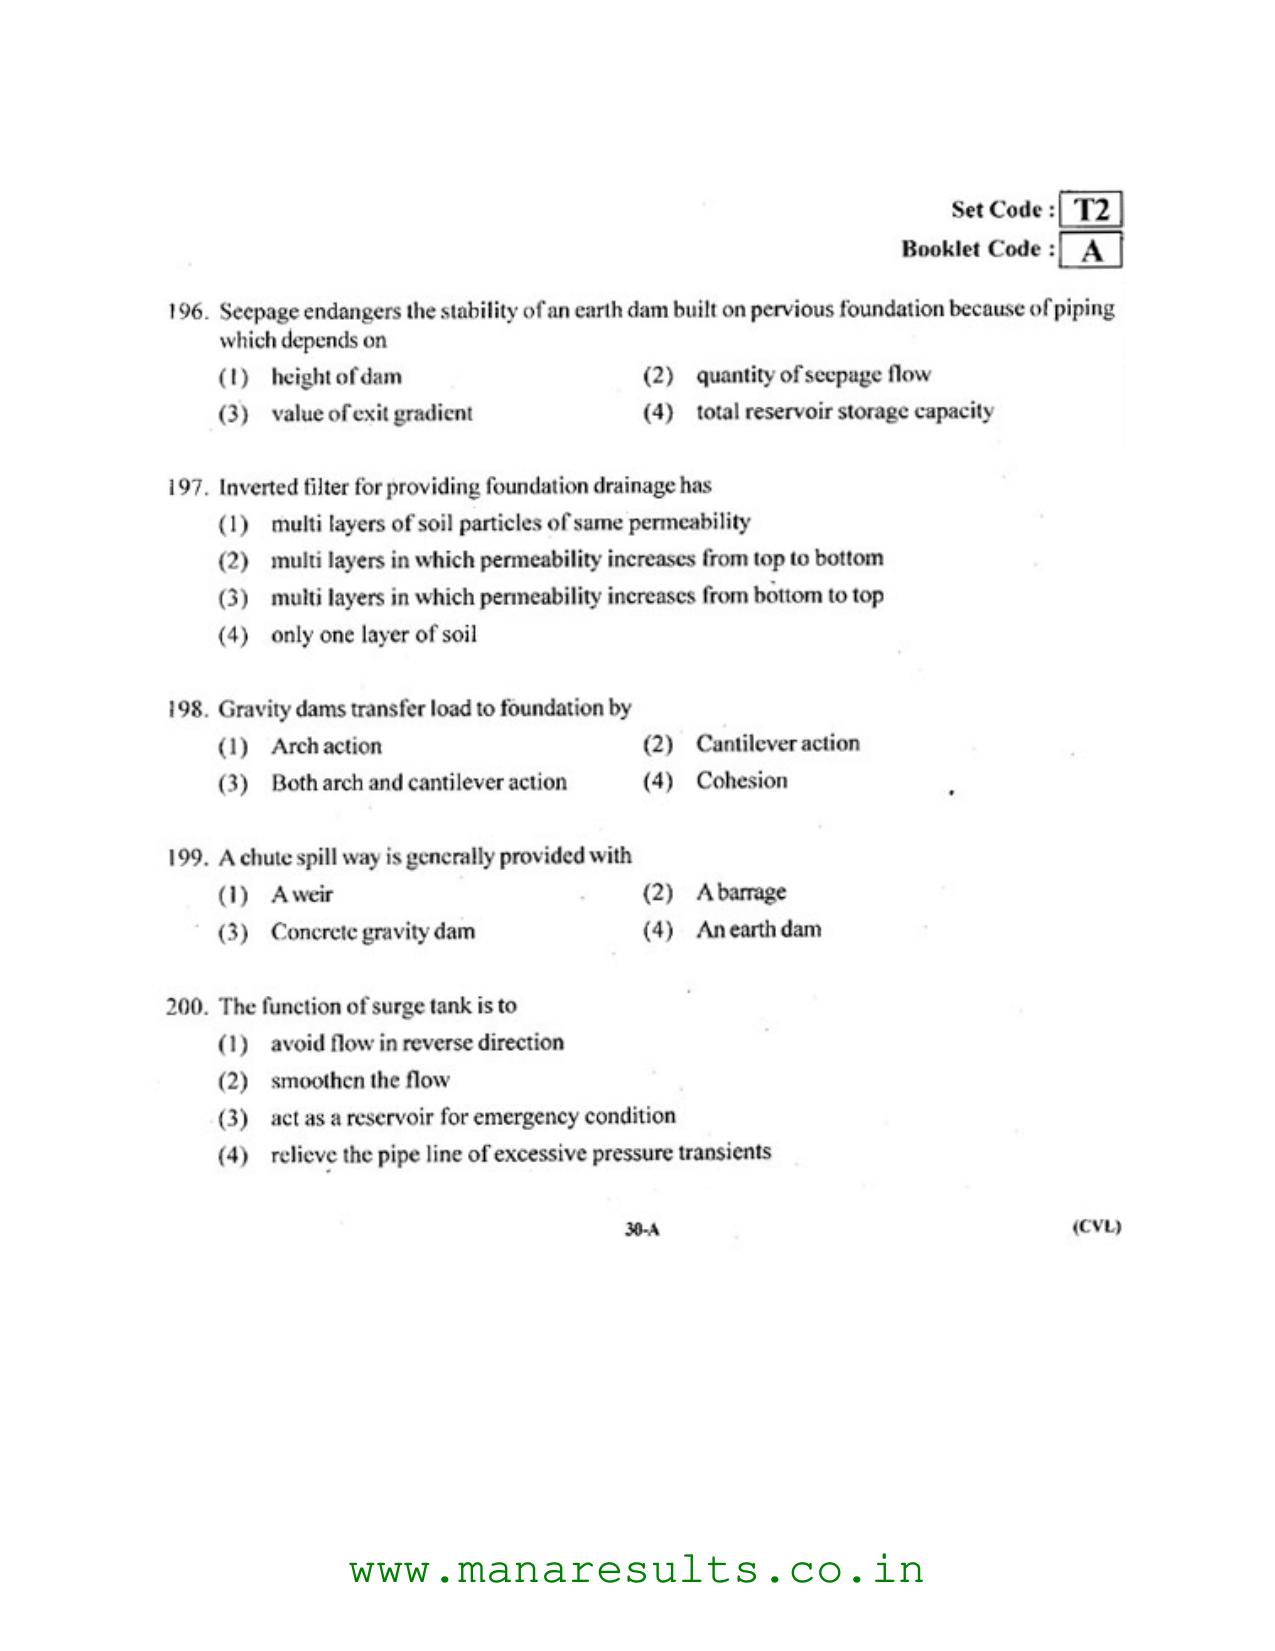 AP ECET 2016 Civil Engineering Old Previous Question Papers - Page 29